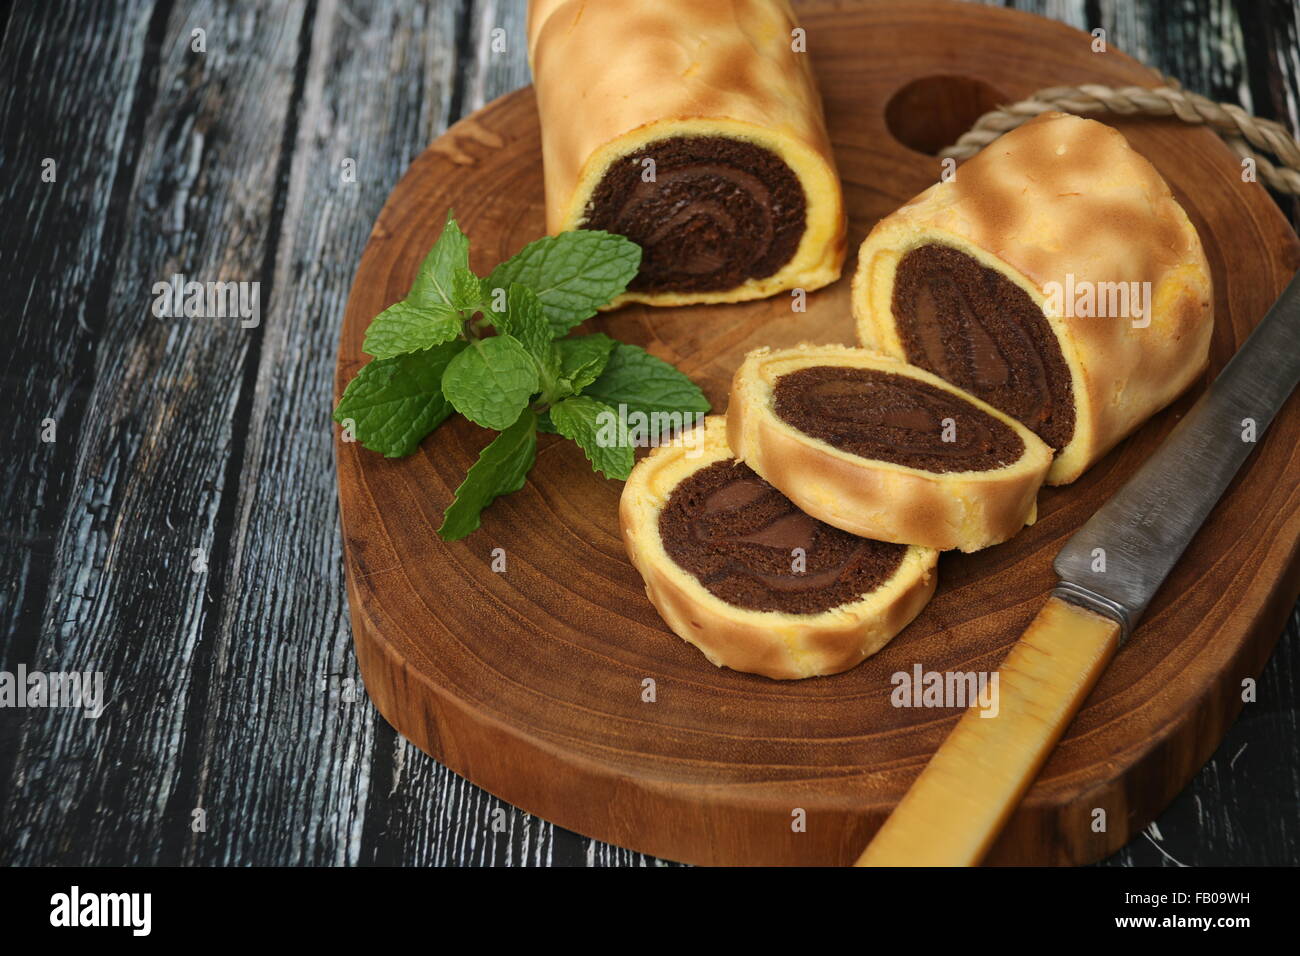 Mini rolled cakes with chocolate flavor inside, layered with vanilla flavor sponge. Stock Photo